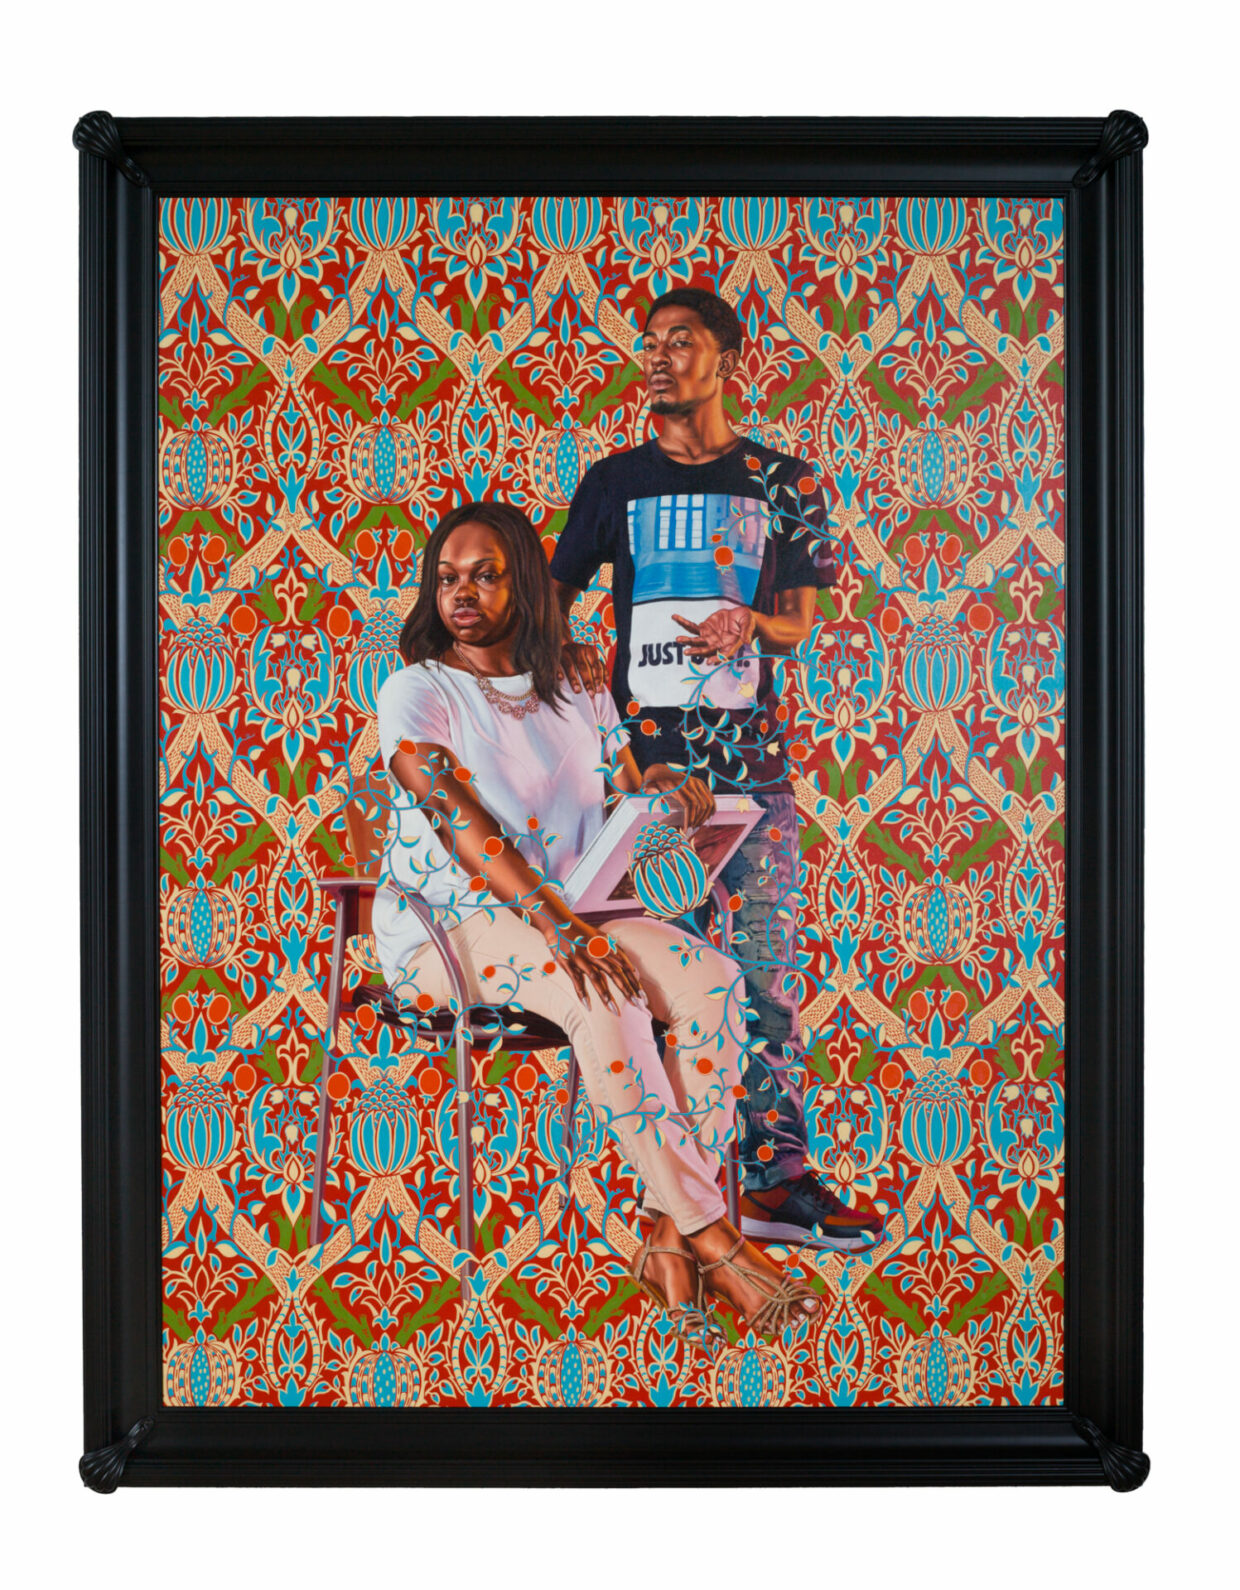 Kehinde Wiley: ‘When I first started painting black women, it was a return home’ | 11